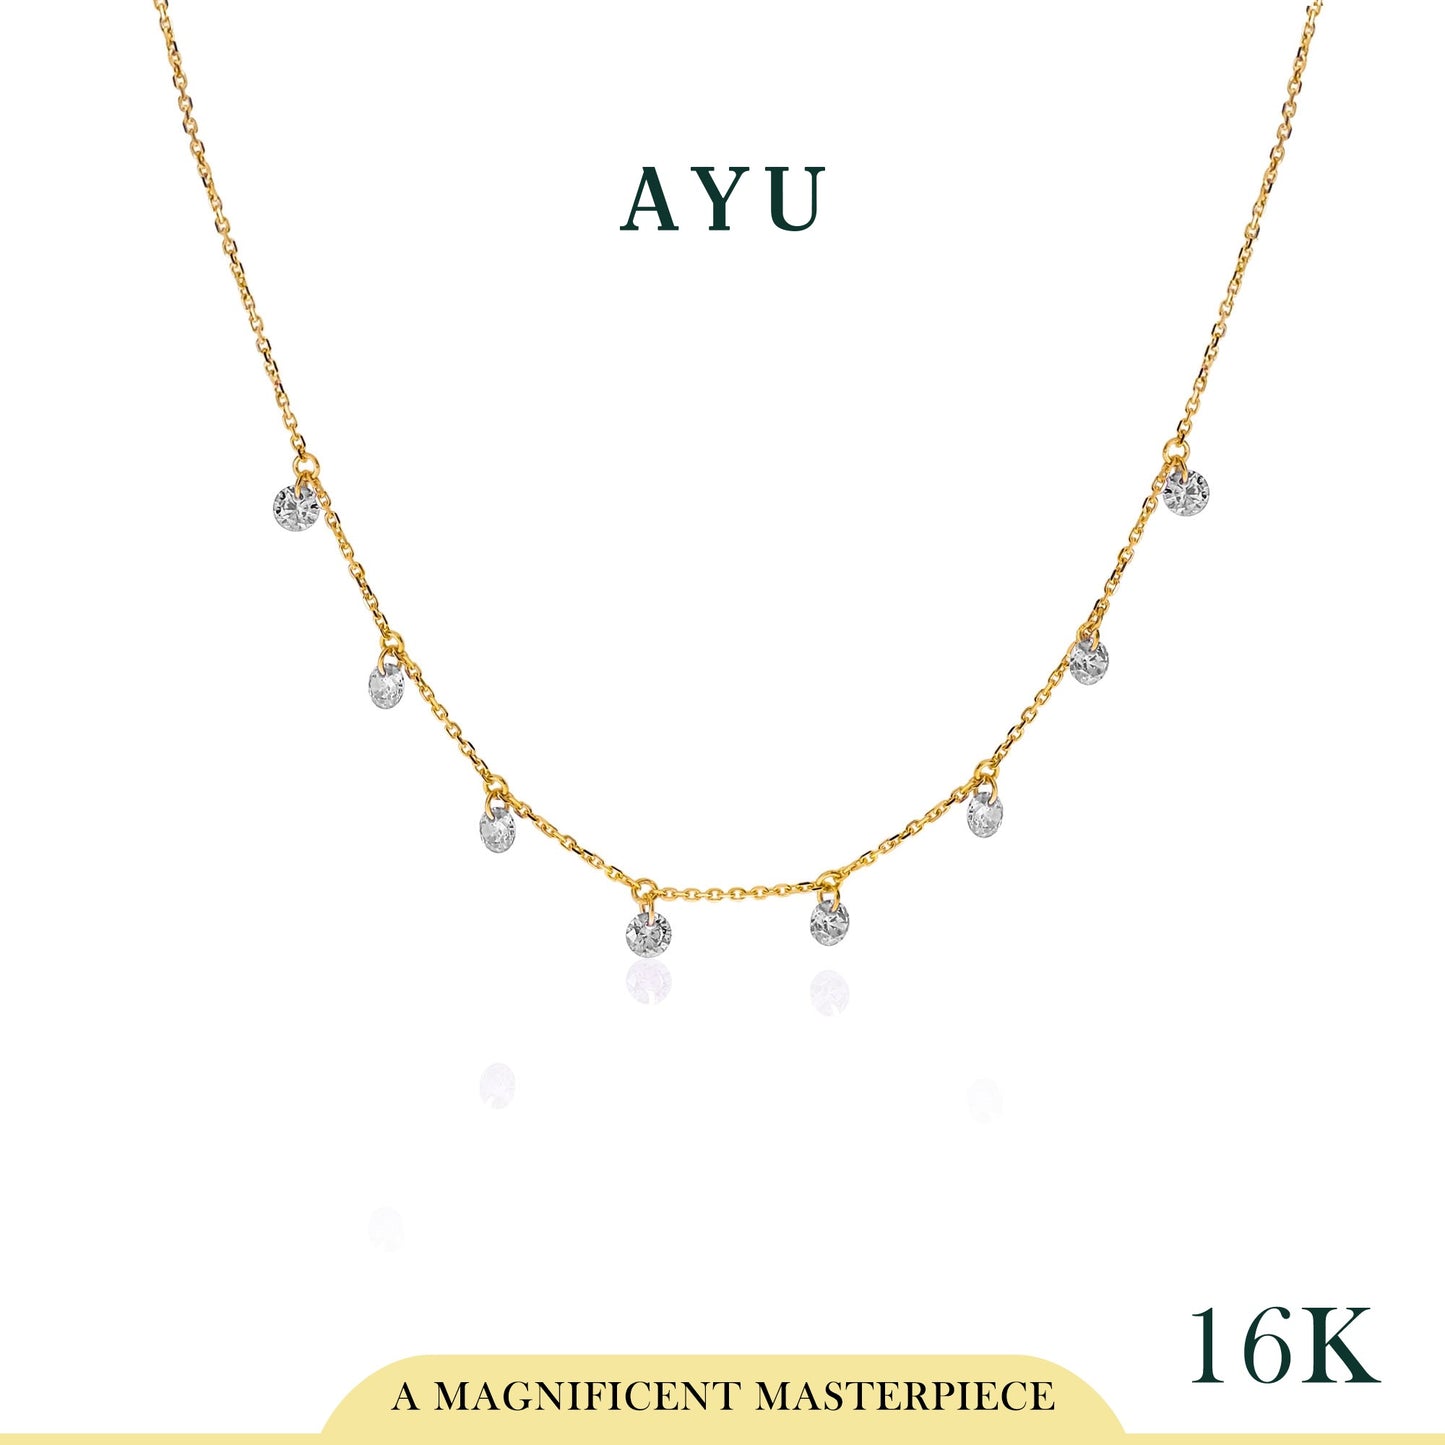 AYU 8 Candy Pop Chain Necklace 16K Yellow Gold